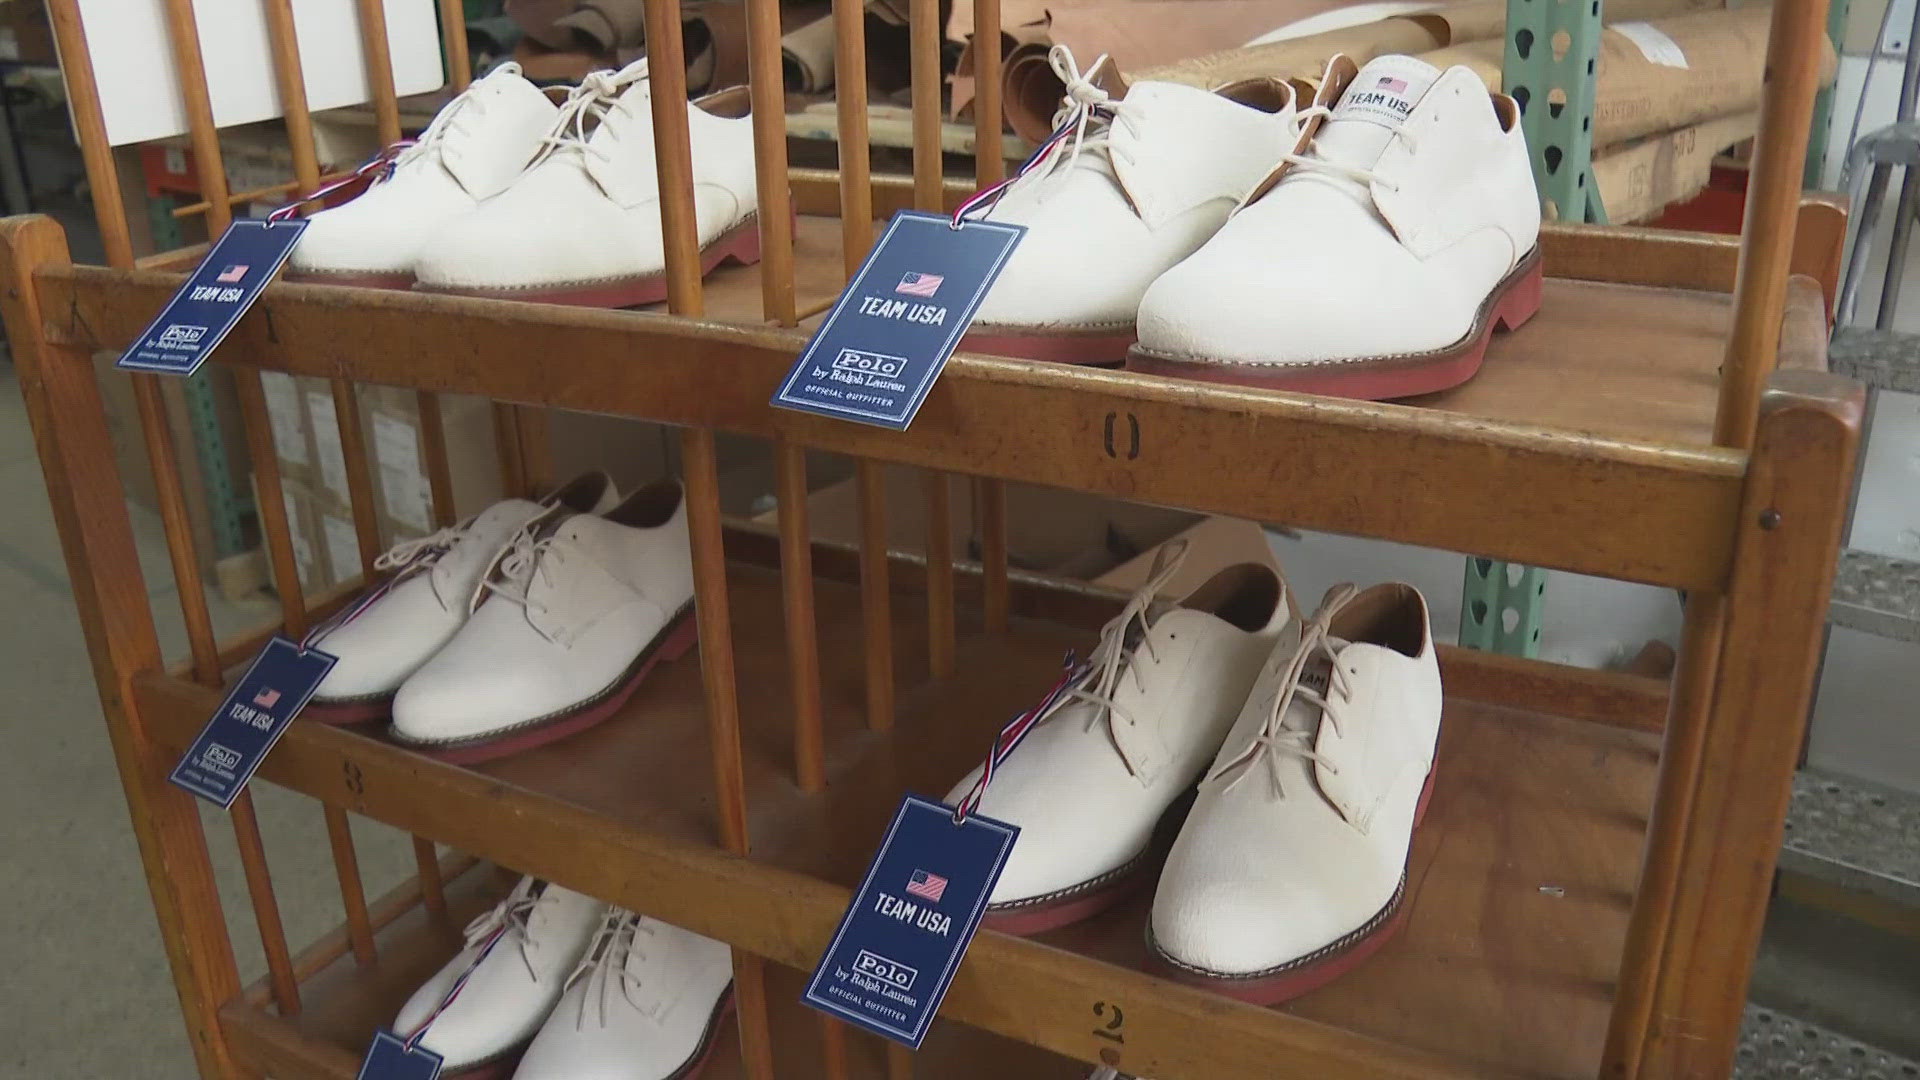 Rancourt and Co. handmade the shoes Team USA athletes will wear. It's the fourth Olympic cycle Polo Ralph Lauren has asked them to work on this project.